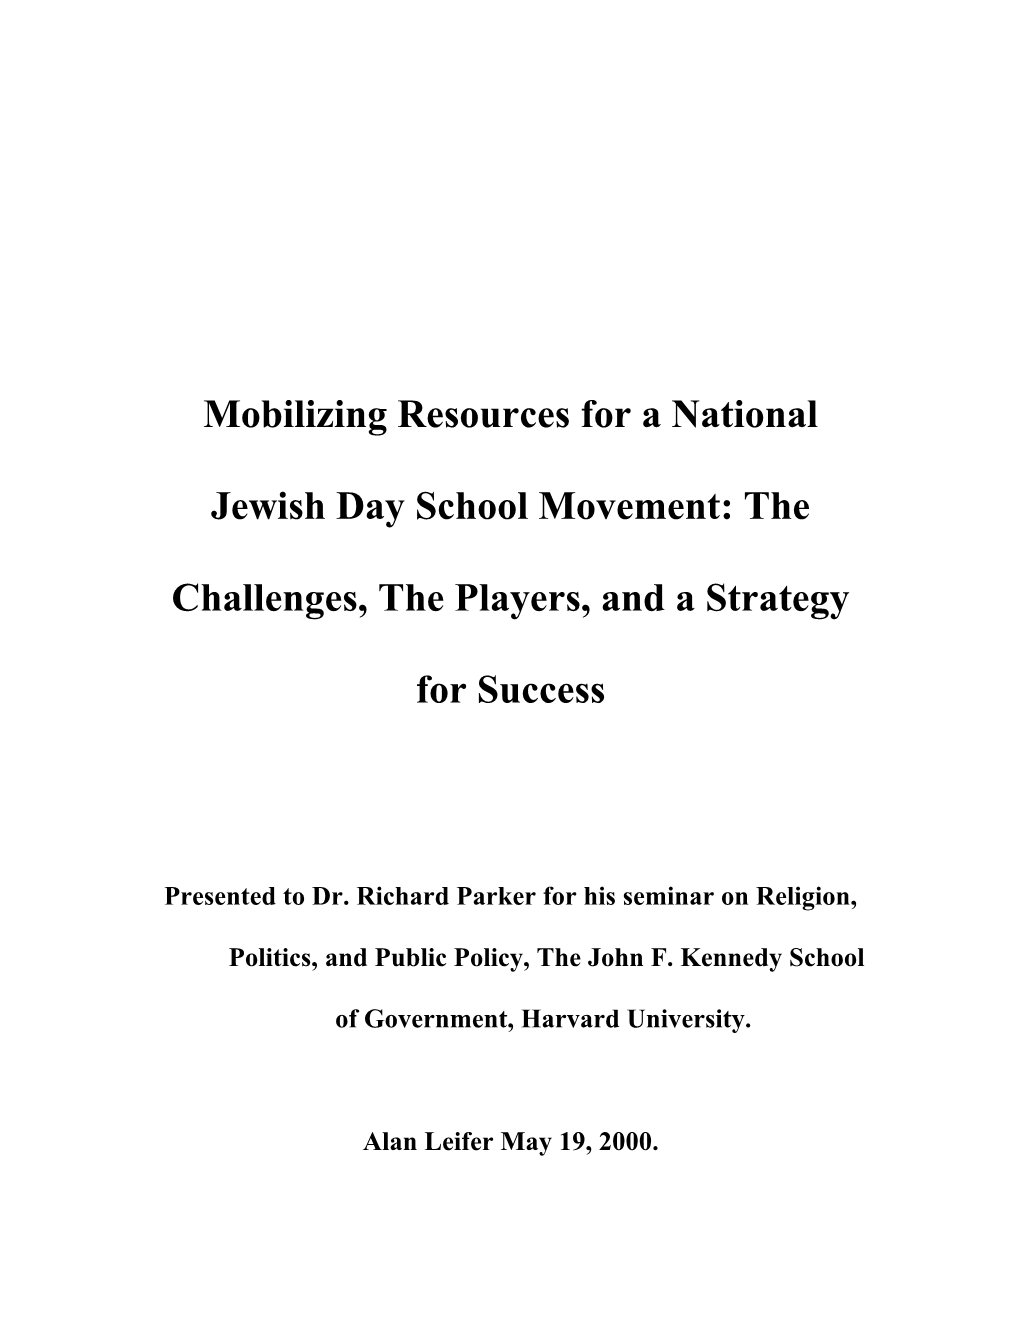 Mobilizing Resources for a National Jewish Day School Movement: the Challenges, the Players